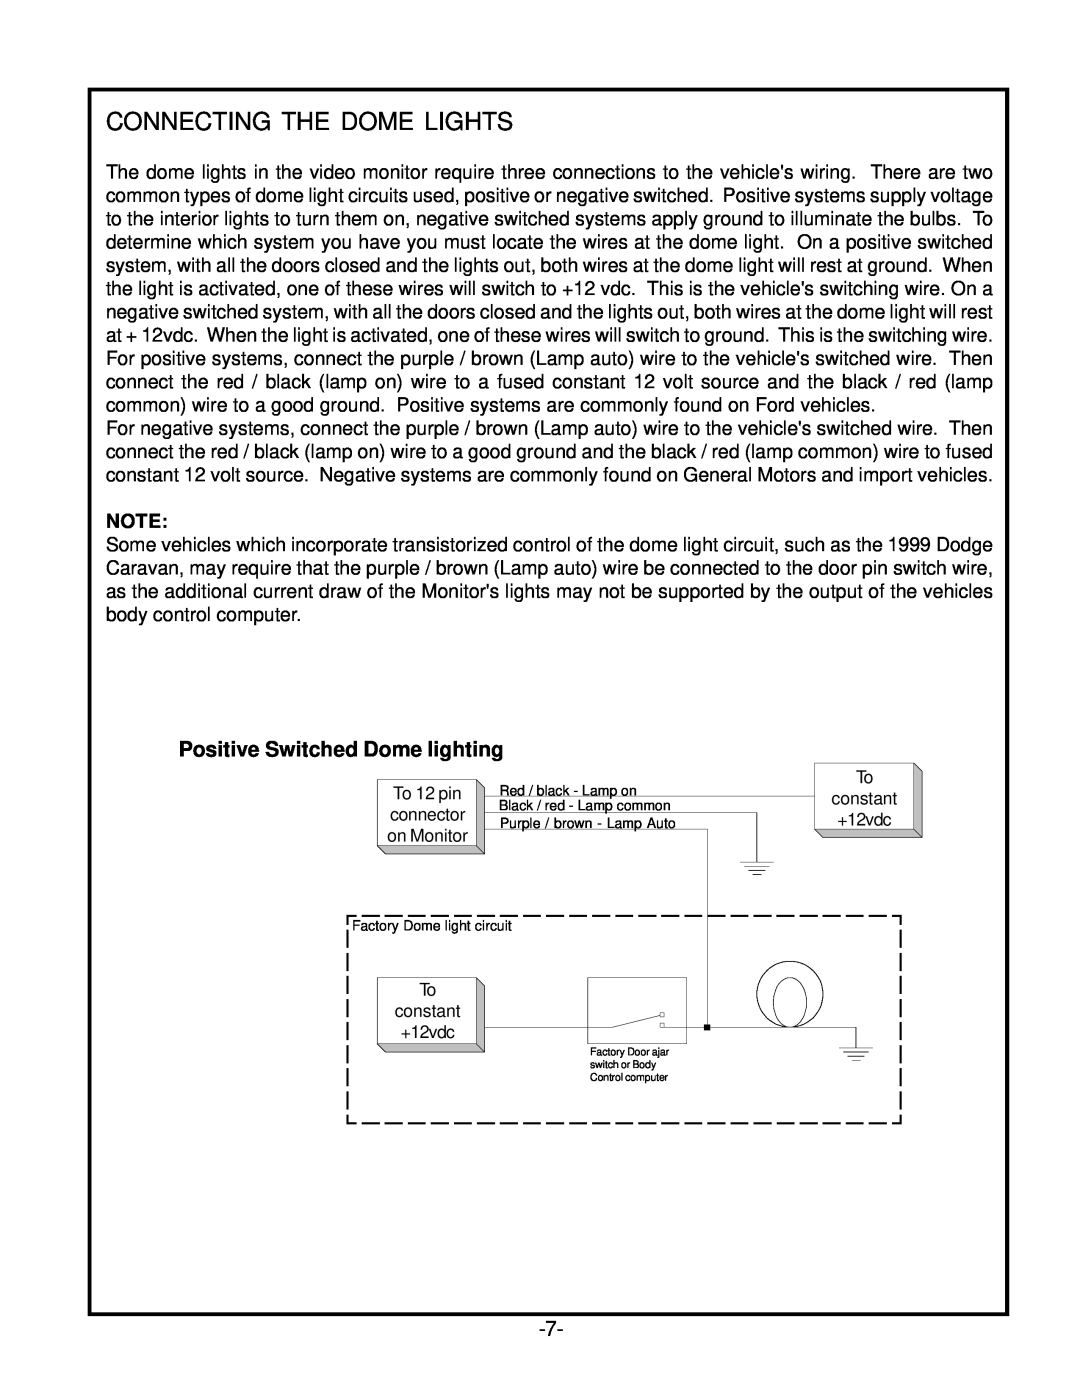 Audiovox VOD806 owner manual Connecting The Dome Lights, Positive Switched Dome lighting 